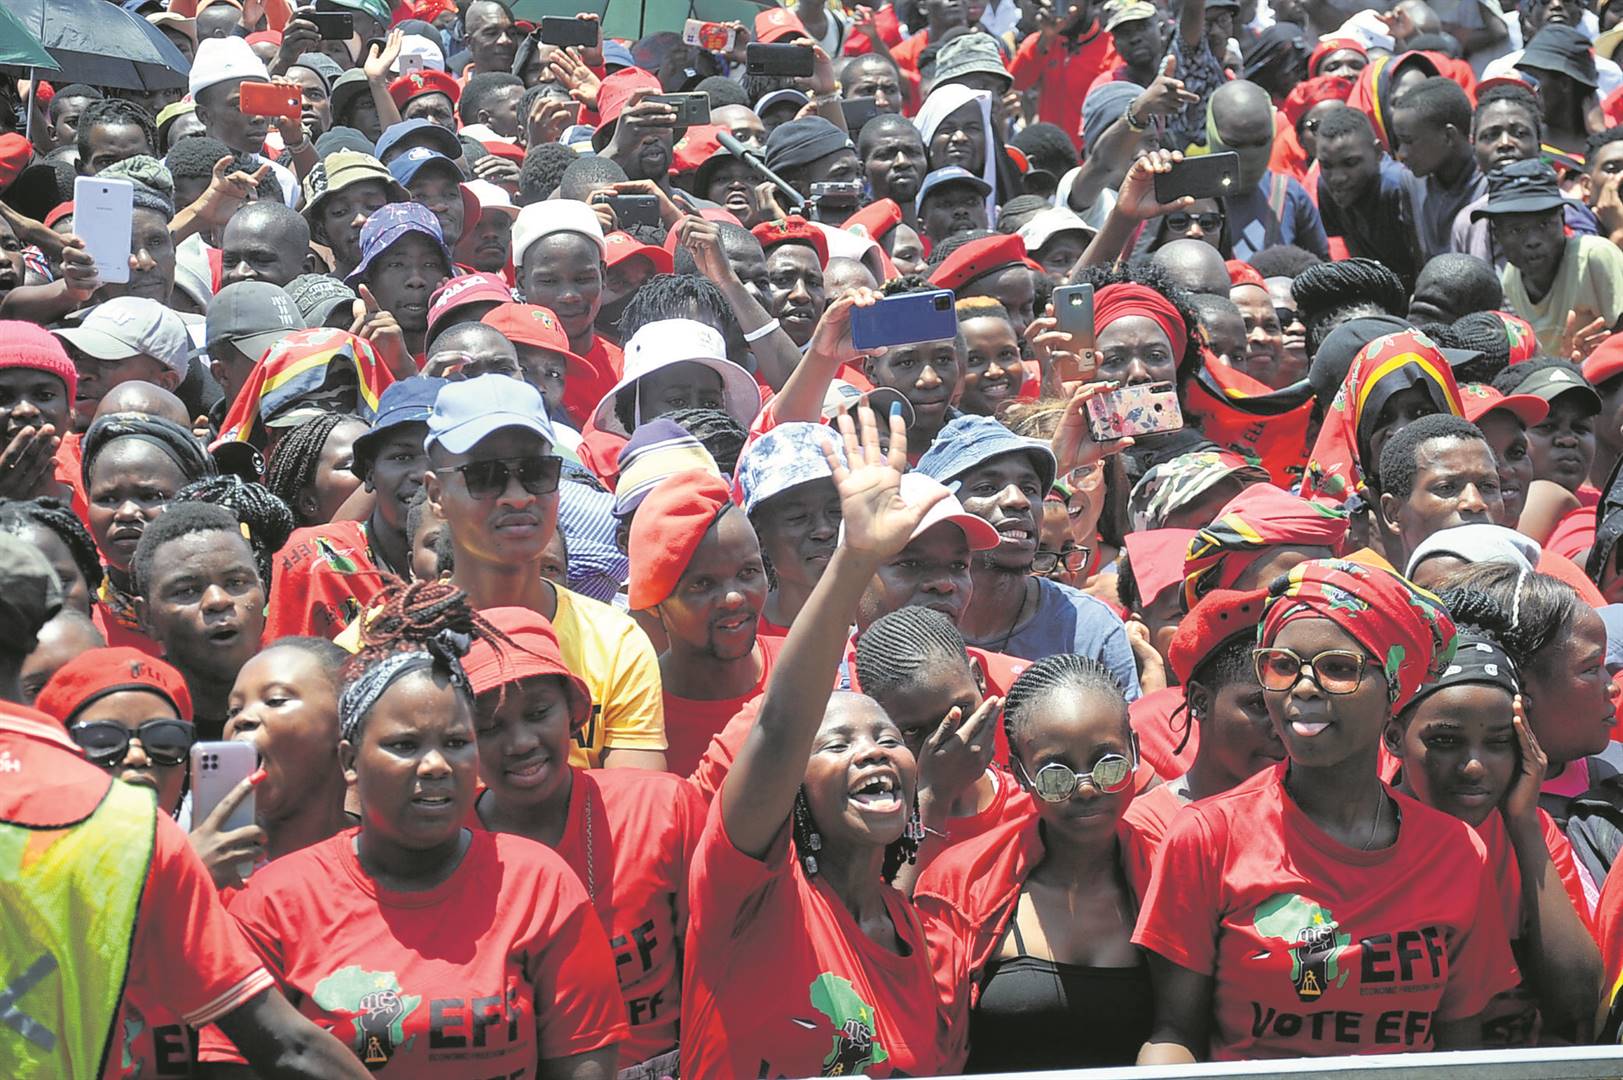 EFF supporters gathered at a rally at the People’s Park in Durban on Saturday, 8 January.